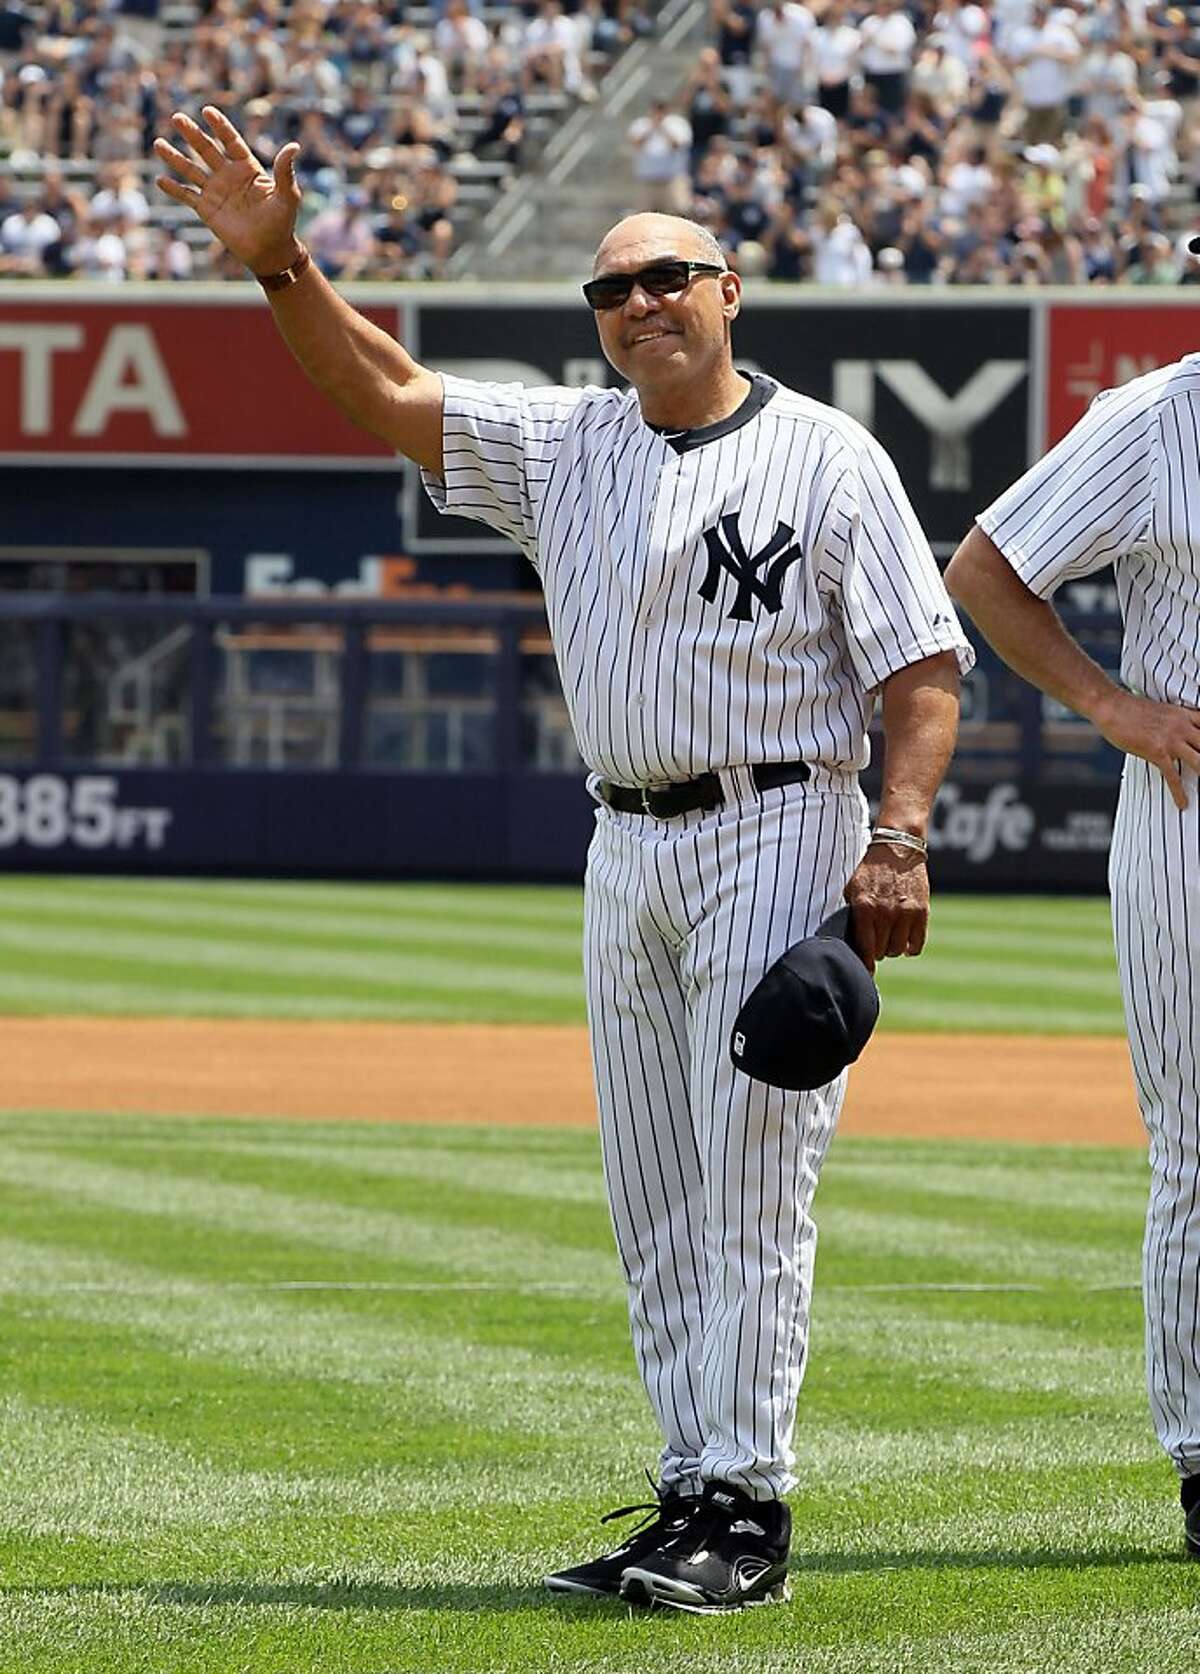 Reggie Jackson is introduced during the New York Yankees 65th Old Timers Day ceremony. The New York Yankees defeated the Colorado Rockies, 6-4, at Yankee Stadium in New York on Sunday, June 26, 2011. (Jim McIsaac/Newsday/MCT) Ran on: 07-07-2011 Photo caption Dummy text goes here. Dummy text goes here. Dummy text goes here. Dummy text goes here. Dummy text goes here. Dummy text goes here. Dummy text goes here. Dummy text goes here.###Photo: names07_PH_reggie1308960000Newsday###Live Caption:Reggie Jackson is introduced during the New York Yankees 65th Old Timers Day ceremony. The New York Yankees defeated the Colorado Rockies, 6-4, at Yankee Stadium in New York on Sunday, June 26, 2011. (Jim McIsaac-Newsday-MCT)###Caption History:Reggie Jackson is introduced during the New York Yankees 65th Old Timers Day ceremony. The New York Yankees defeated the Colorado Rockies, 6-4, at Yankee Stadium in New York on Sunday, June 26, 2011. (Jim McIsaac-Newsday-MCT)###Notes:508709 Rockies at Yankees###Special Instructions:NC BL NEW YORK CITY OUT INTERNET USE OUT